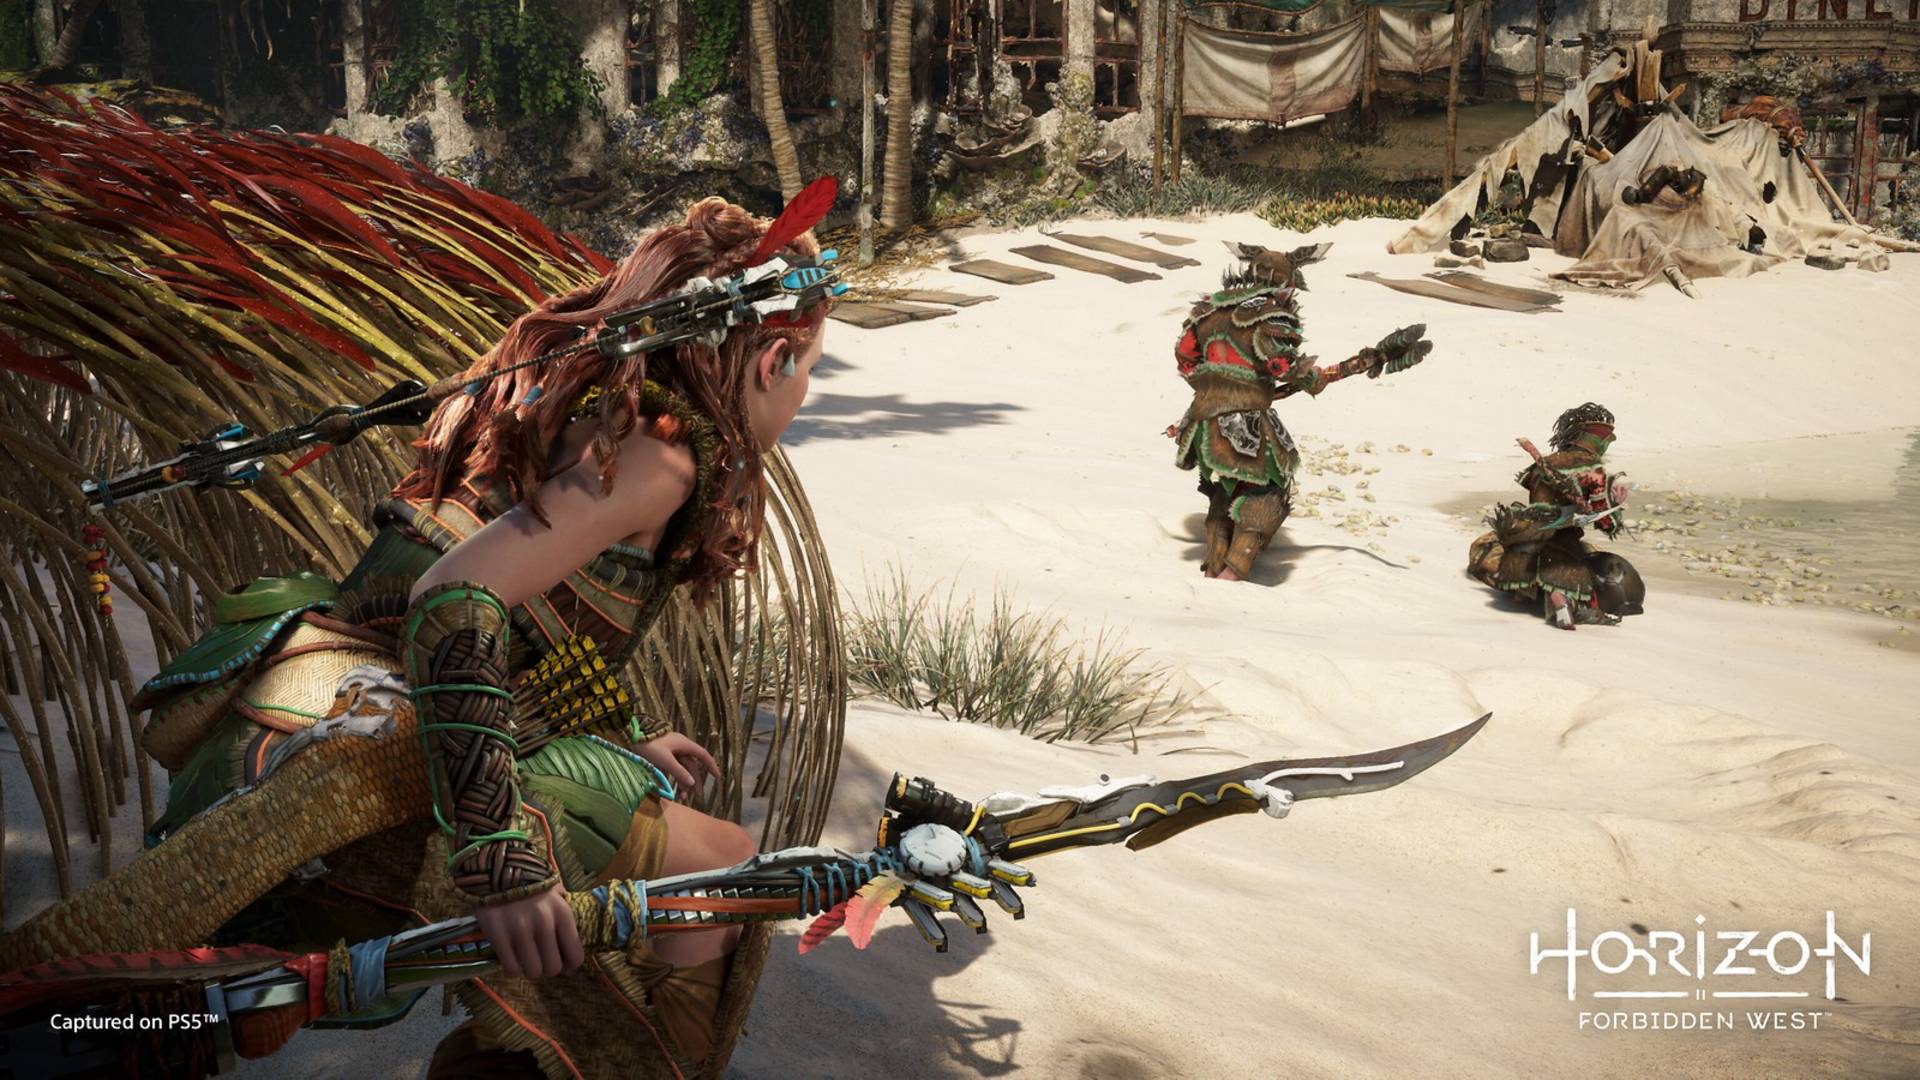 Horizon Forbidden West will have a 60 FPS mode